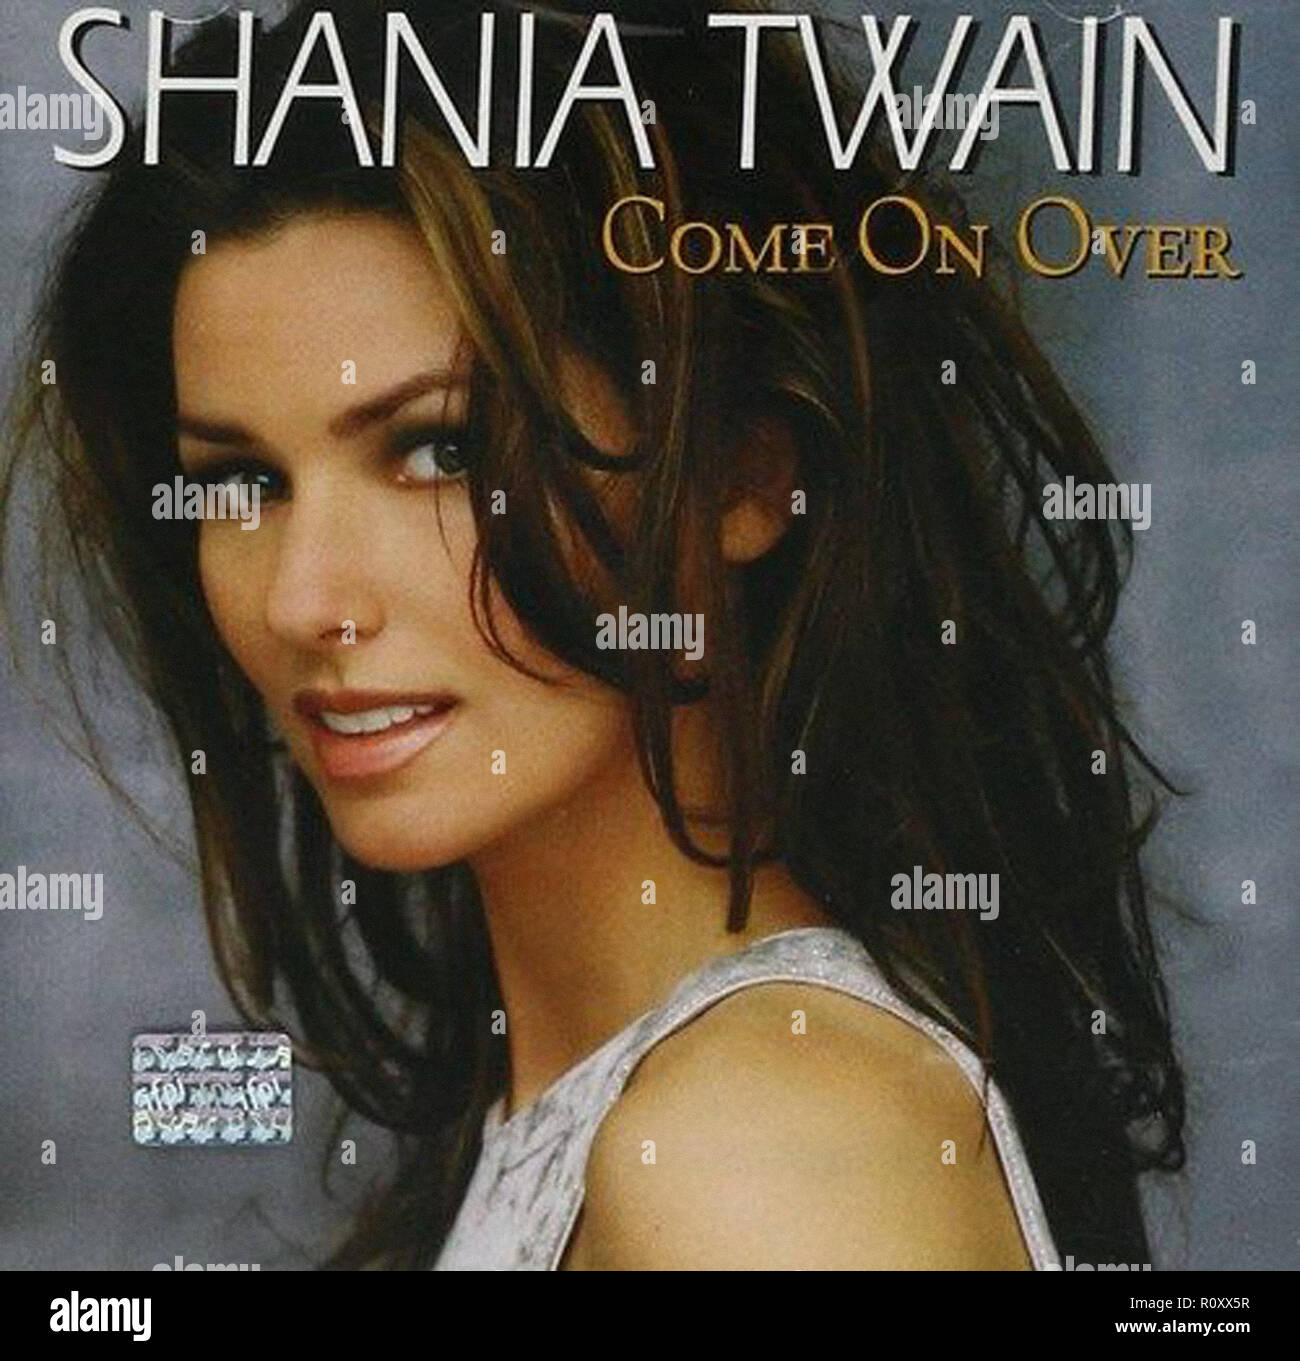 Shania Twain Come On Over Vintage Cover Album Stock Photo Alamy